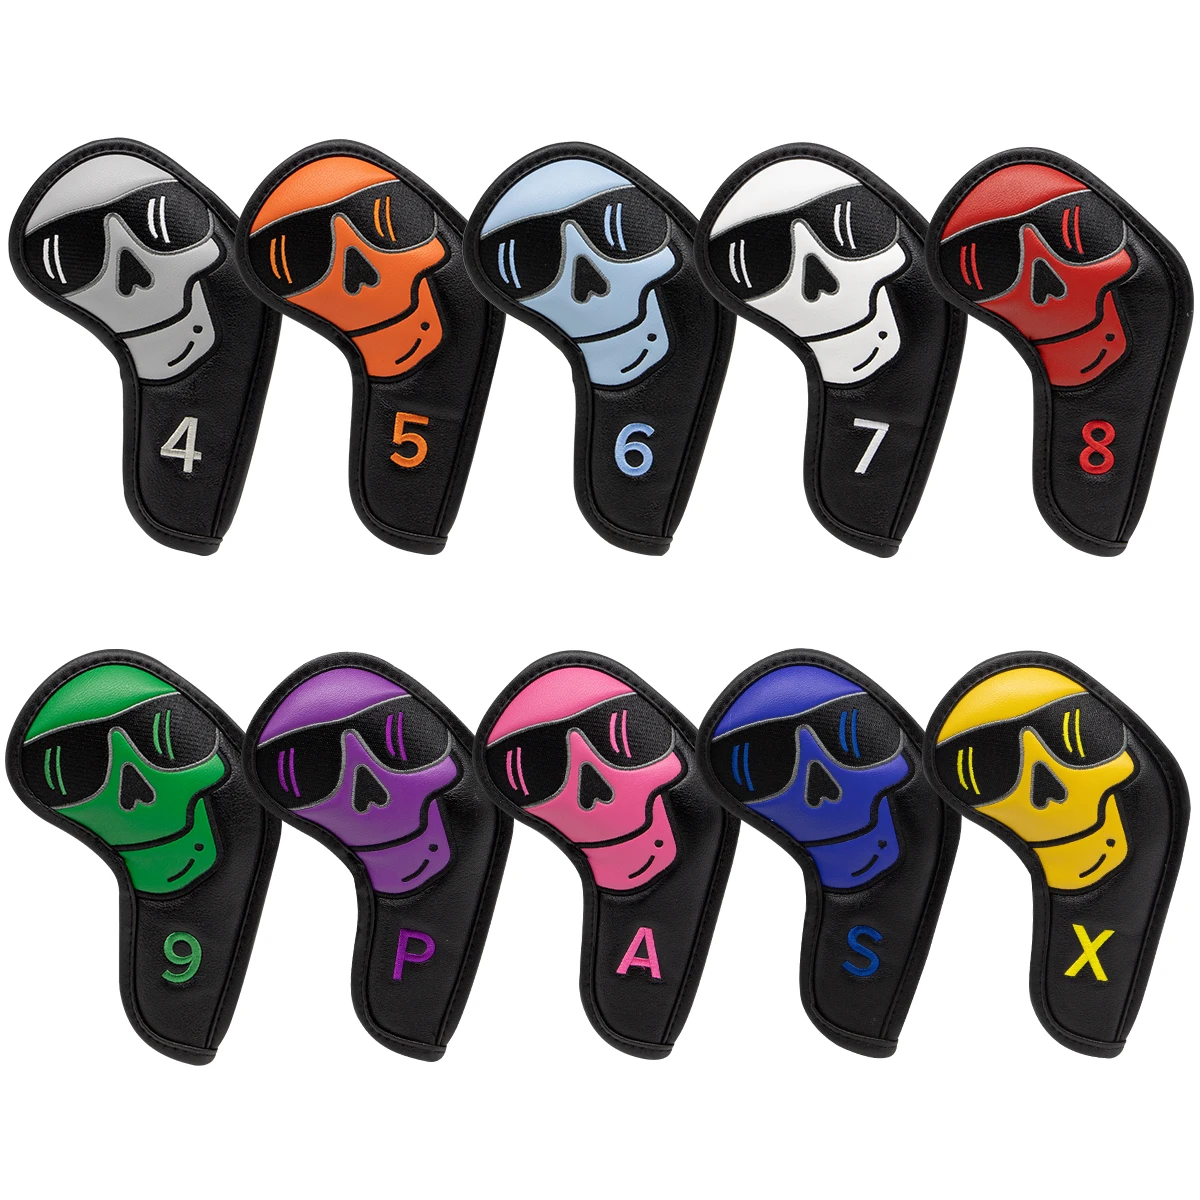 Colorful Sunglasses Golf Iron Head Covers Iron Headovers Wedges Covers 4-9 ASPX 10pcs with Black Color